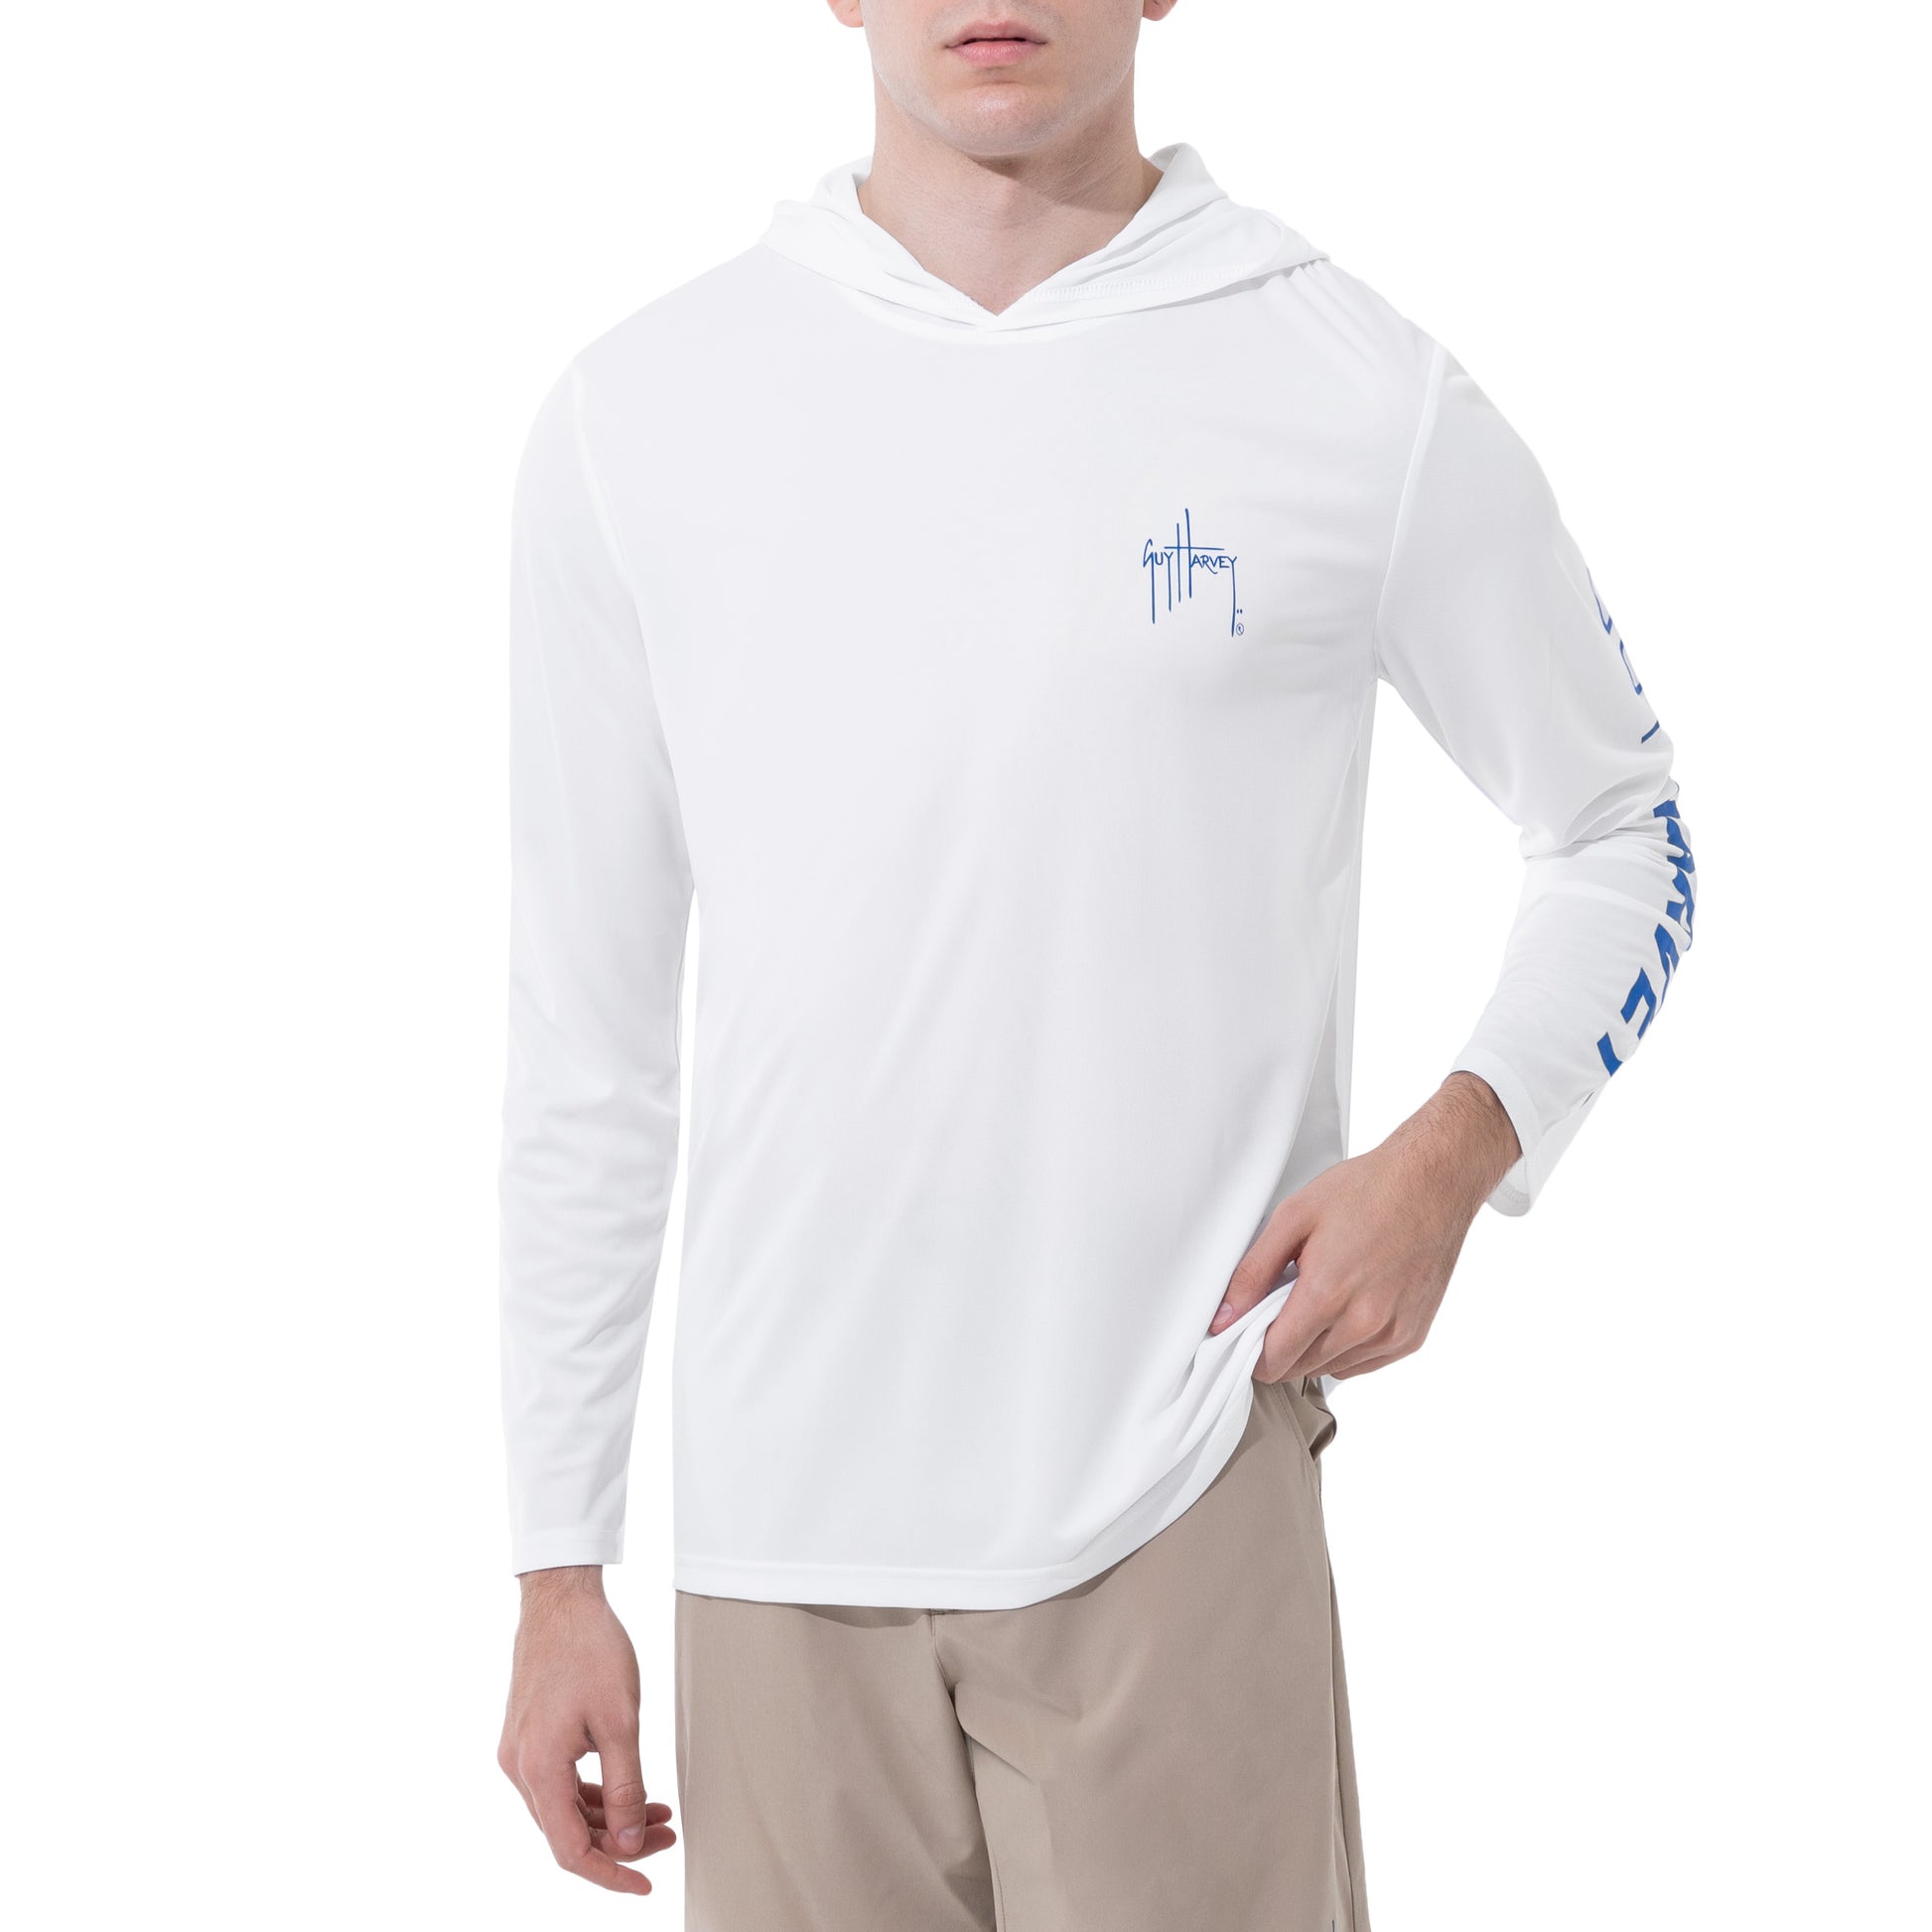 Inadays Men's UPF 50+ Sun Protection Hoodie Shirts Long Sleeve